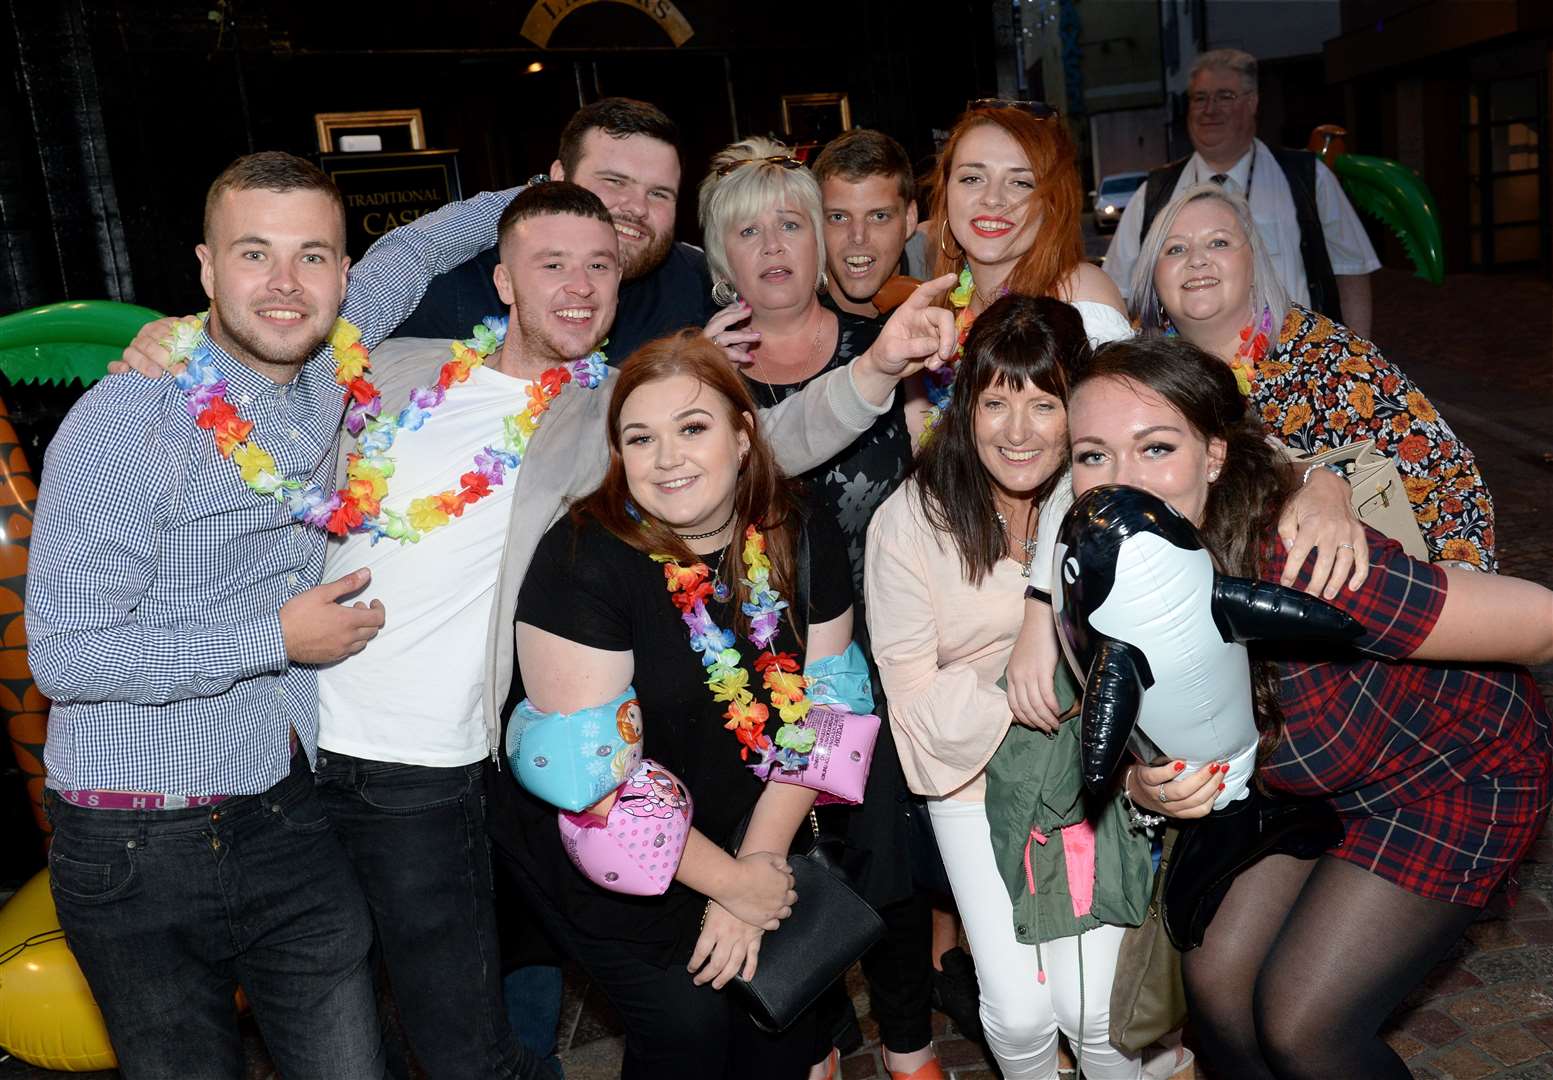 Keiran Stewart (left) celebrates his Maths Degree from Edinburgh University with friends. Picture: Gary Anthony.